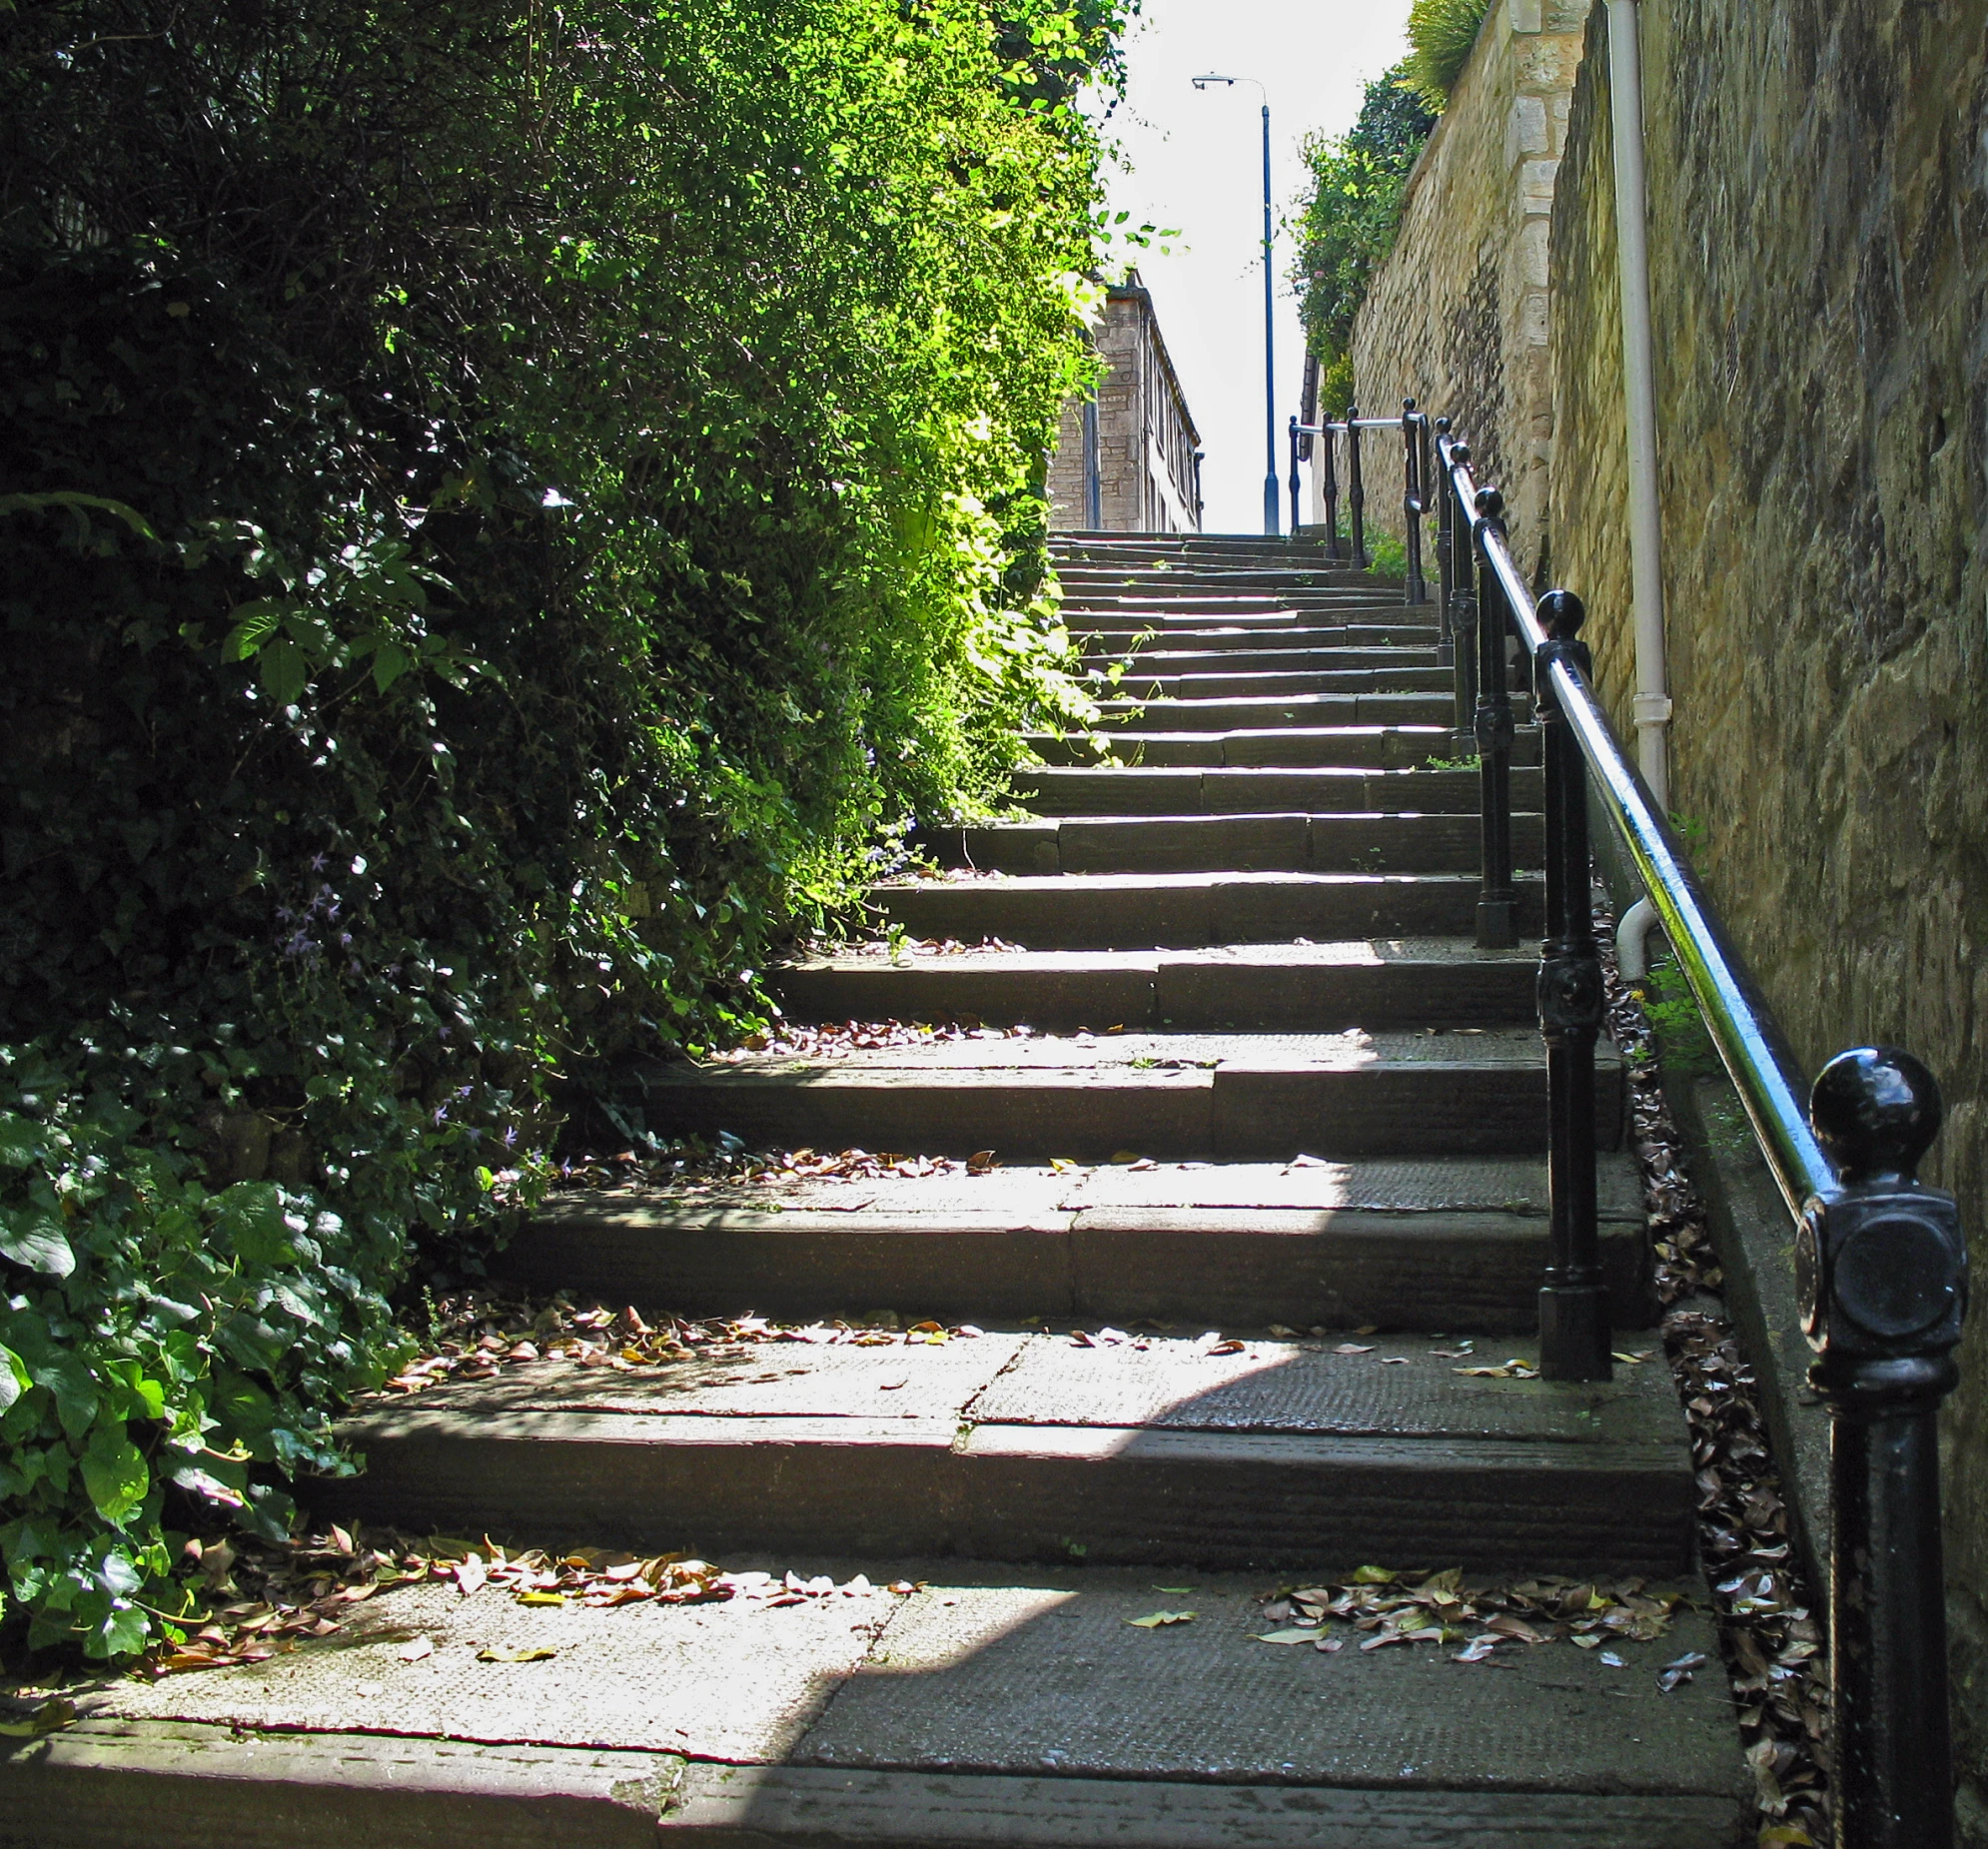 a sidewalk with some trees and stone stairs